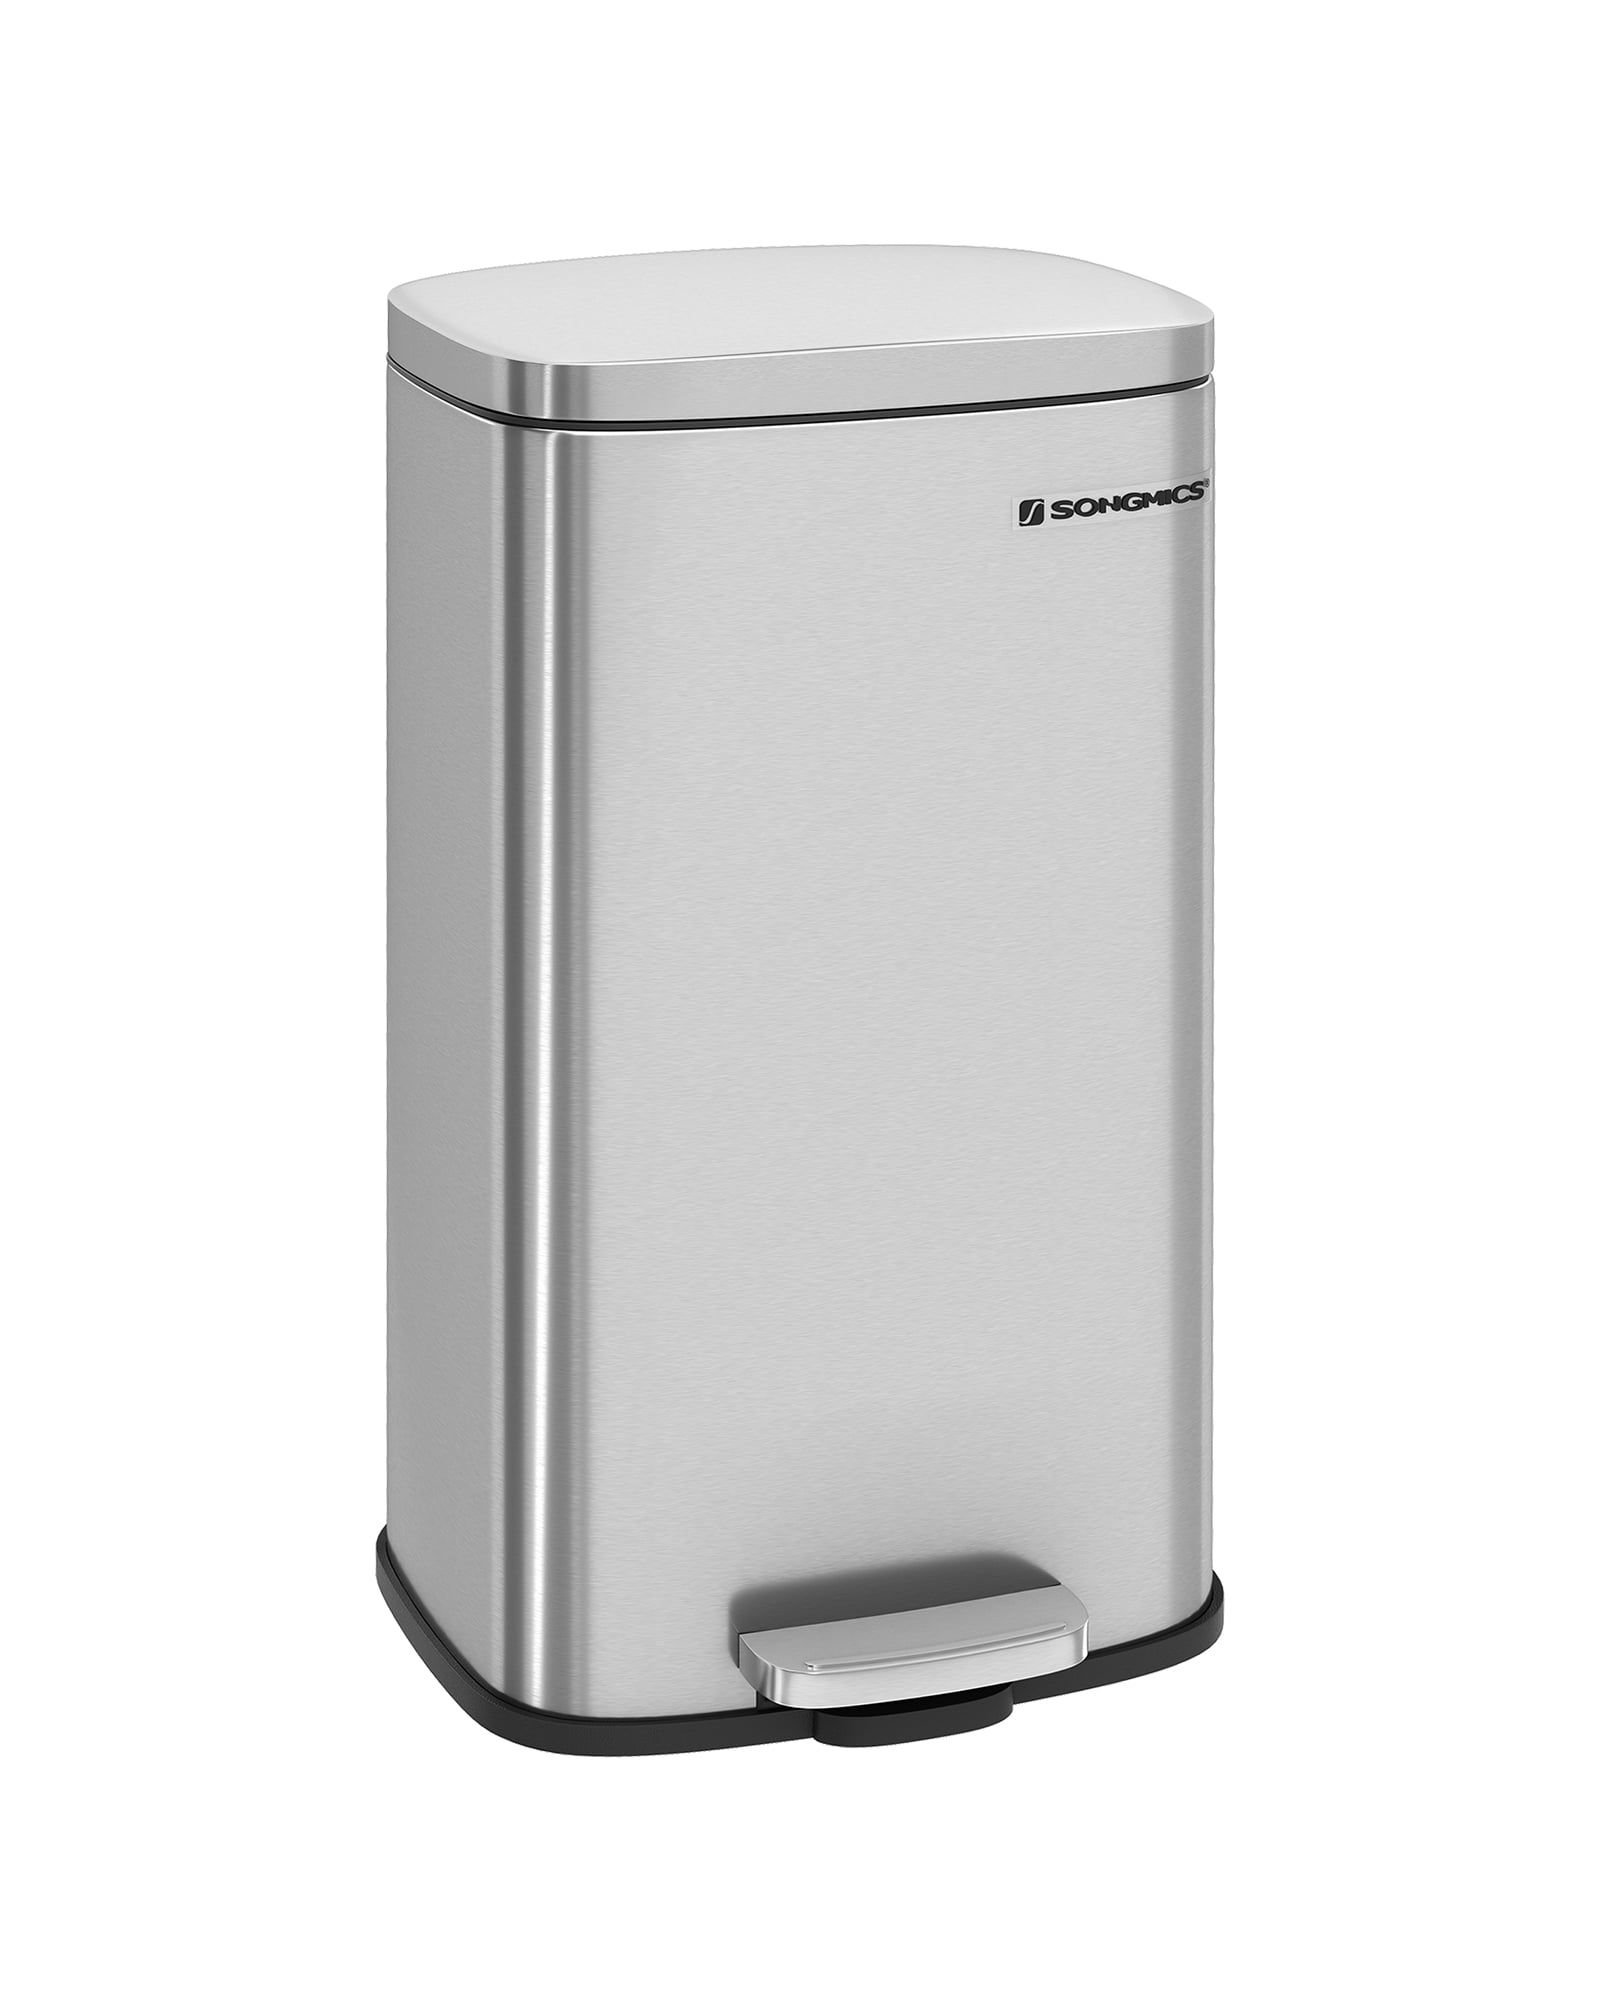 Songmics 8 Gallon Kitchen Trash Can with Lid Stainless Steel